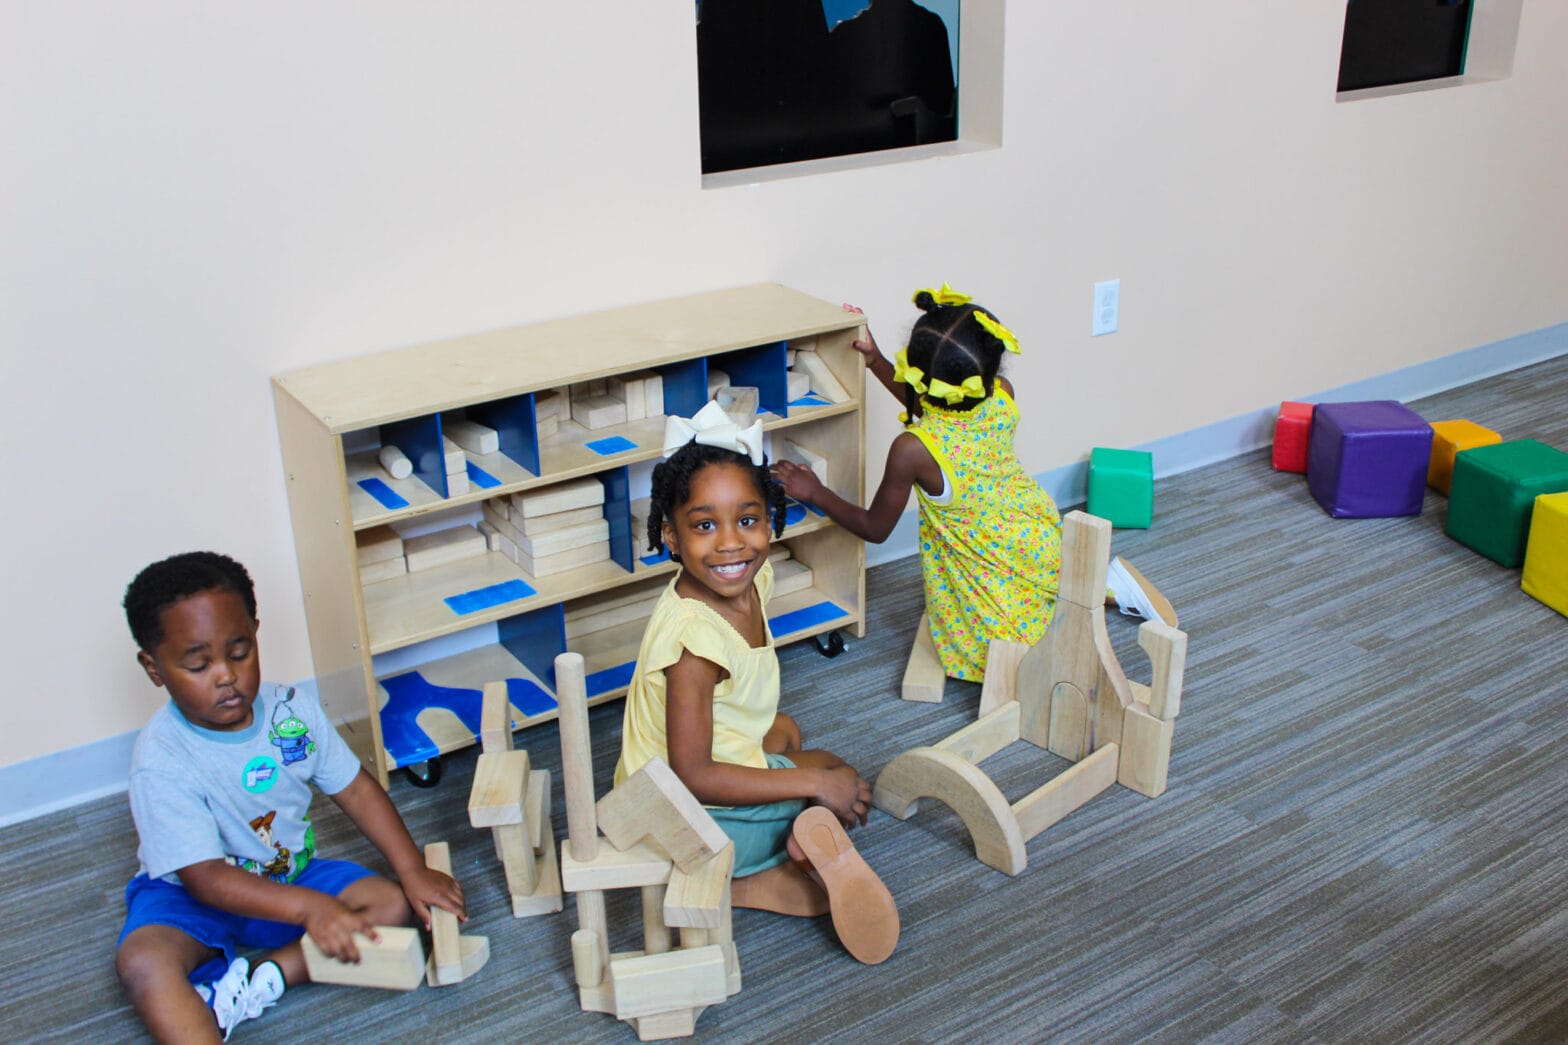 Three young children playing with building blocks and toys in the Geaux Figure Playhouse